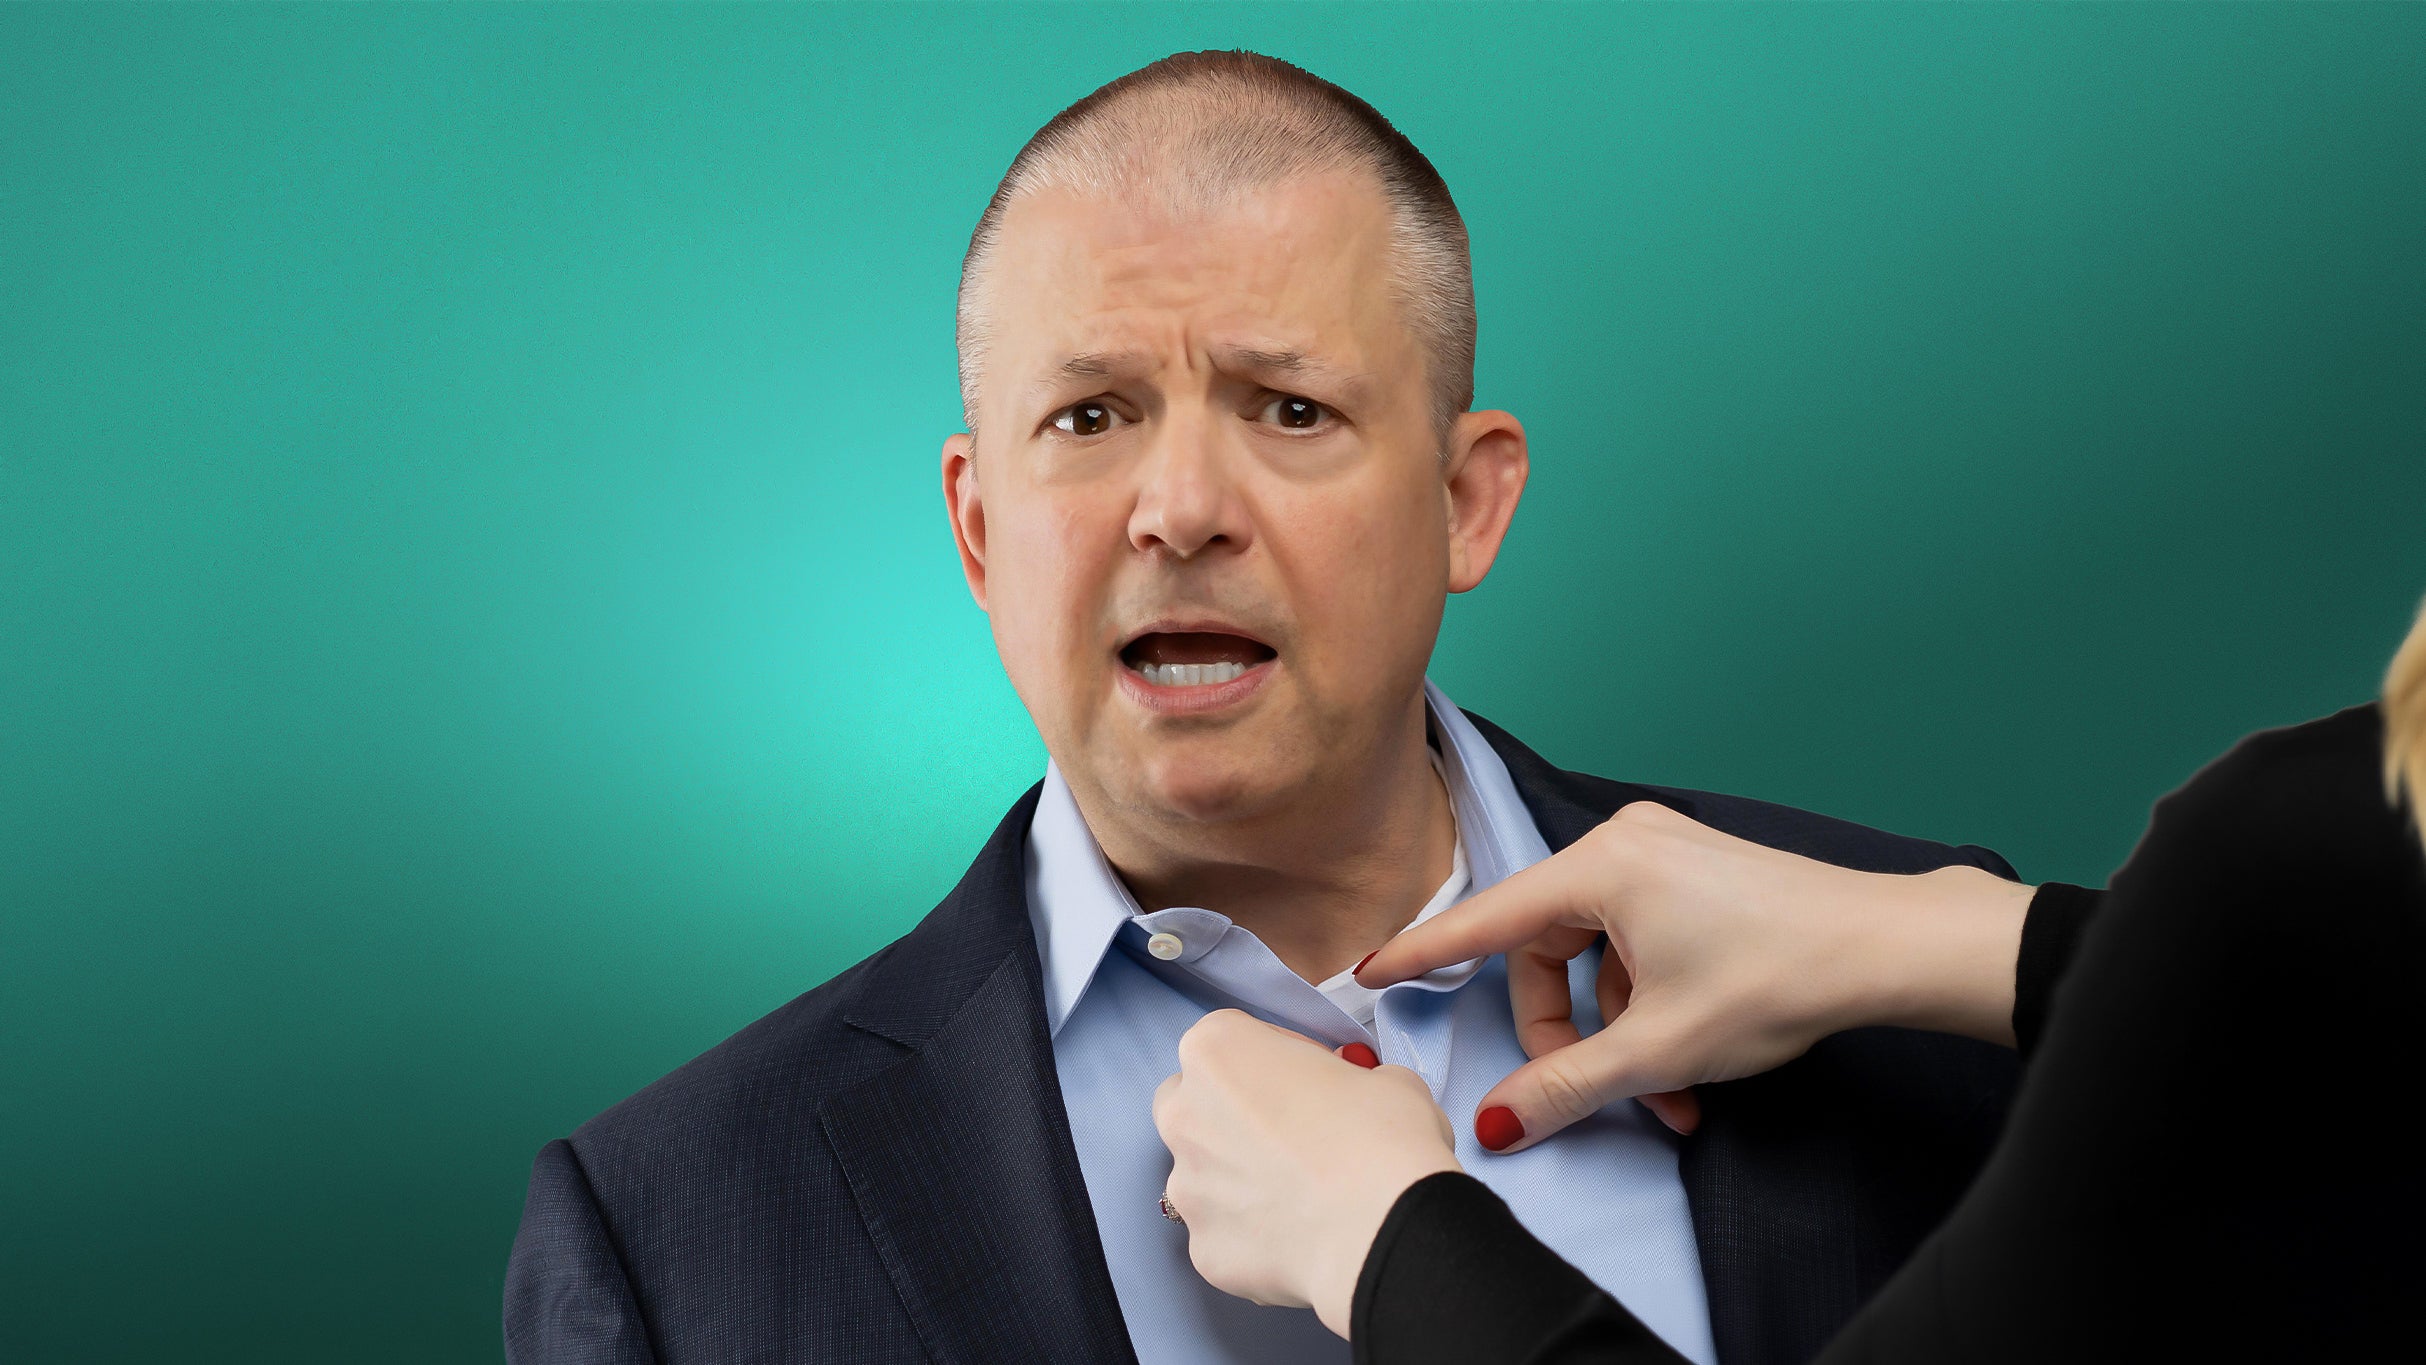 Jim Norton: Now You Know (Ages 18+) at Old National Centre